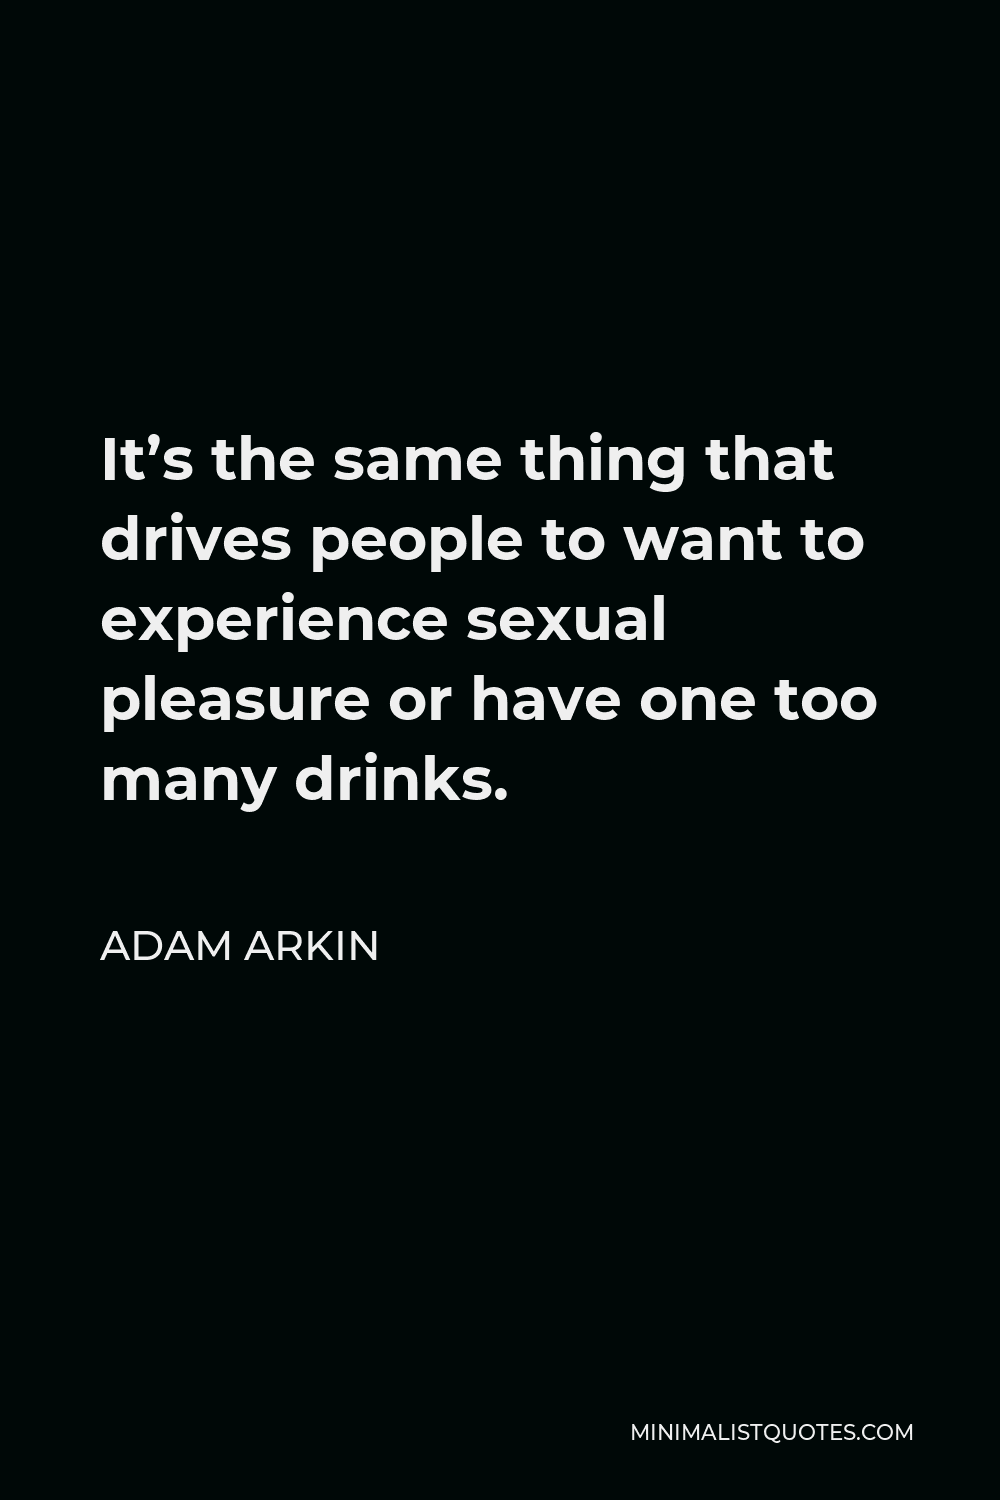 Adam Arkin Quote - It’s the same thing that drives people to want to experience sexual pleasure or have one too many drinks.